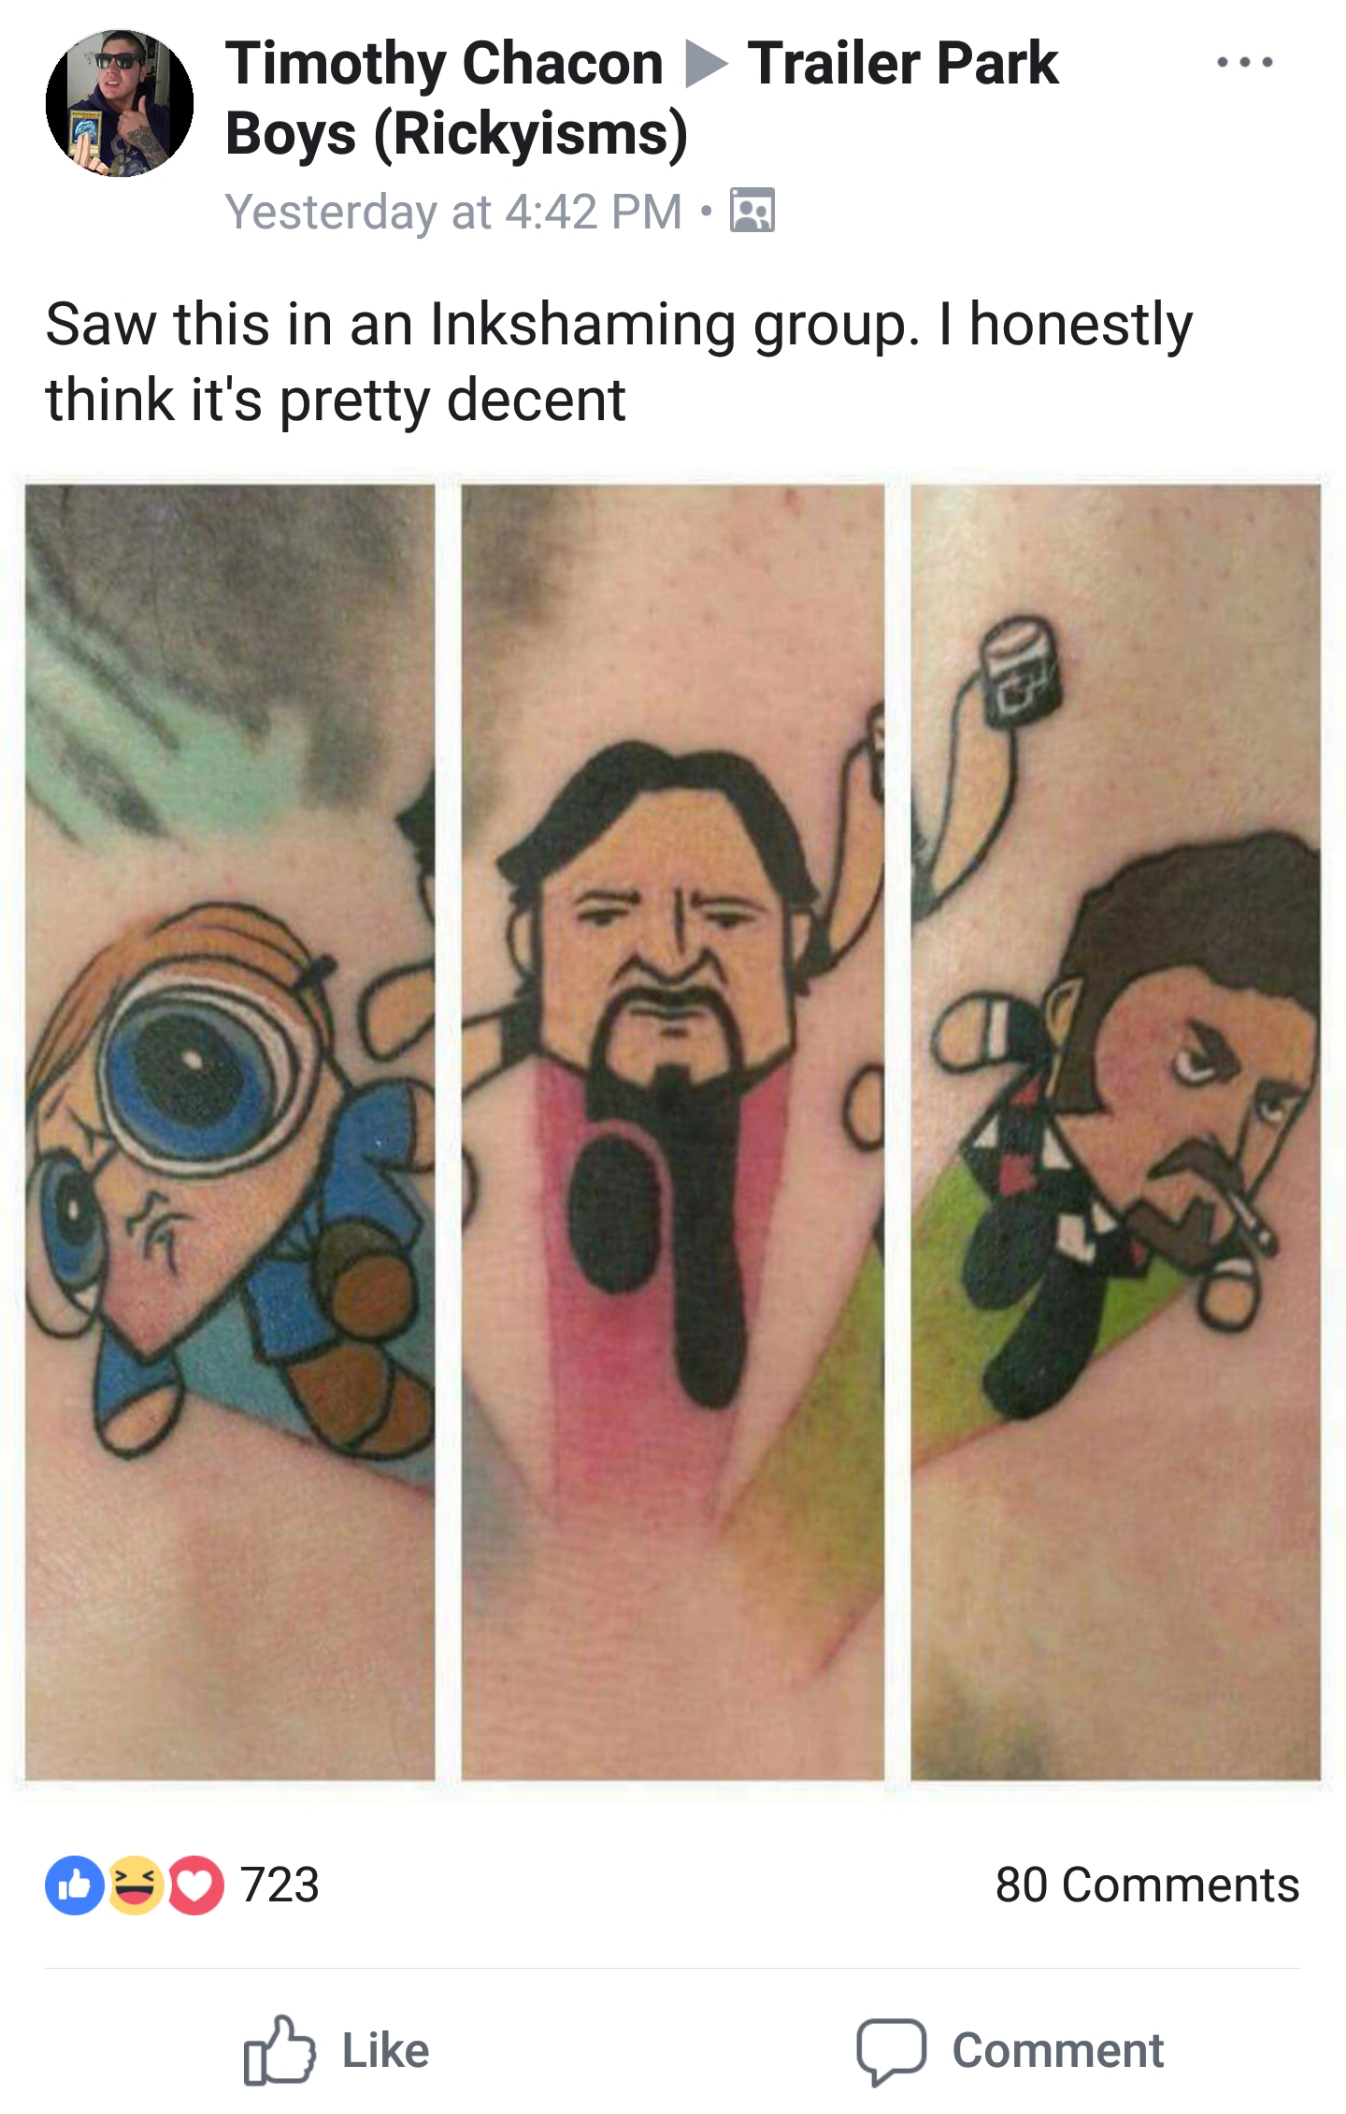 trailer park boys tattoo - Timothy Chacon Trailer Park Boys Rickyisms Yesterday at Saw this in an Inkshaming group. I honestly think it's pretty decent 0 80 723 D Comment